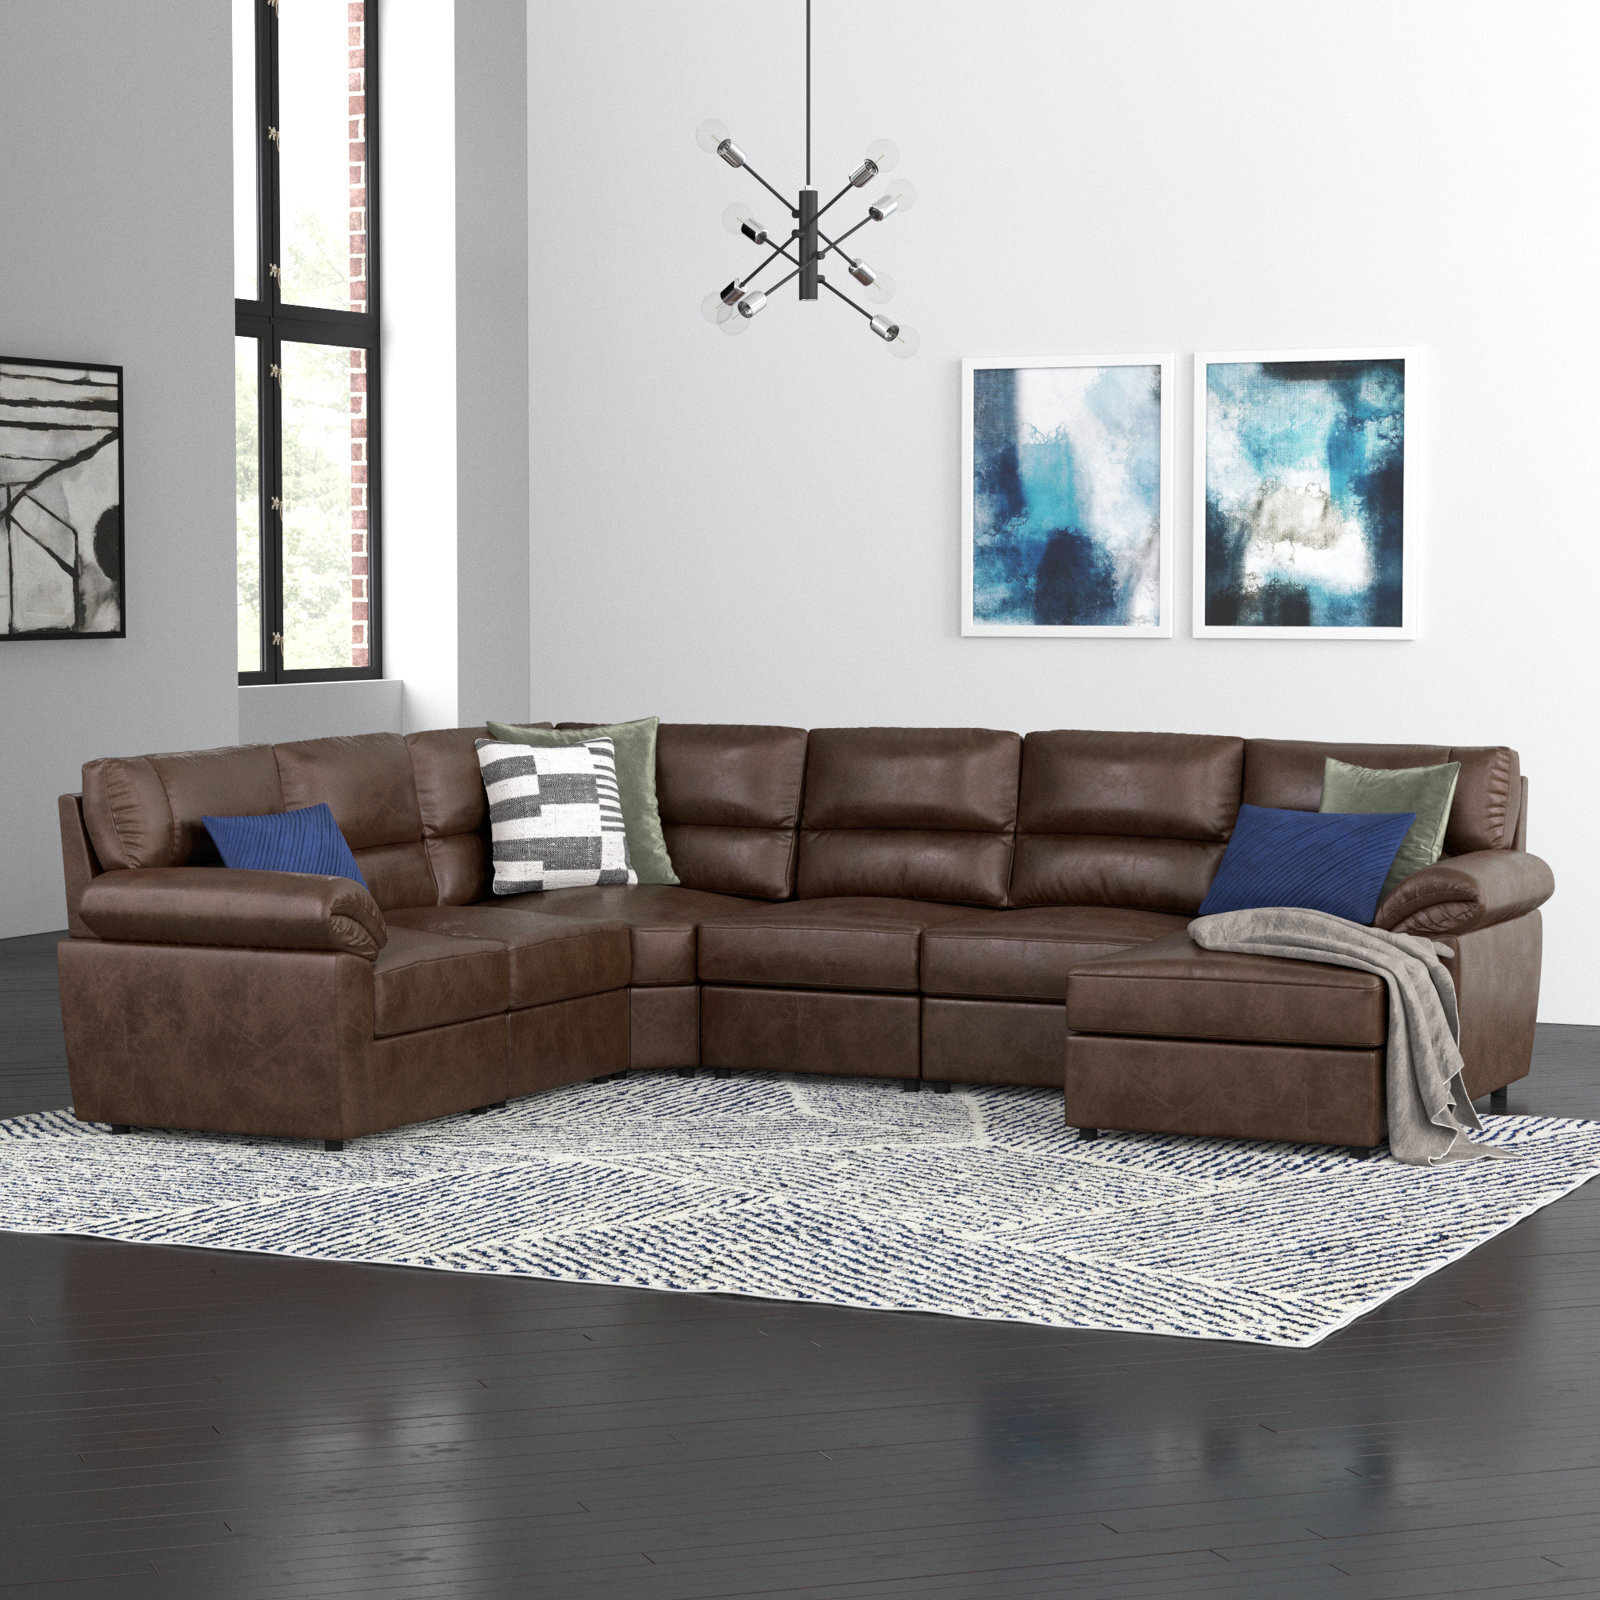 Modular Leather Sectional